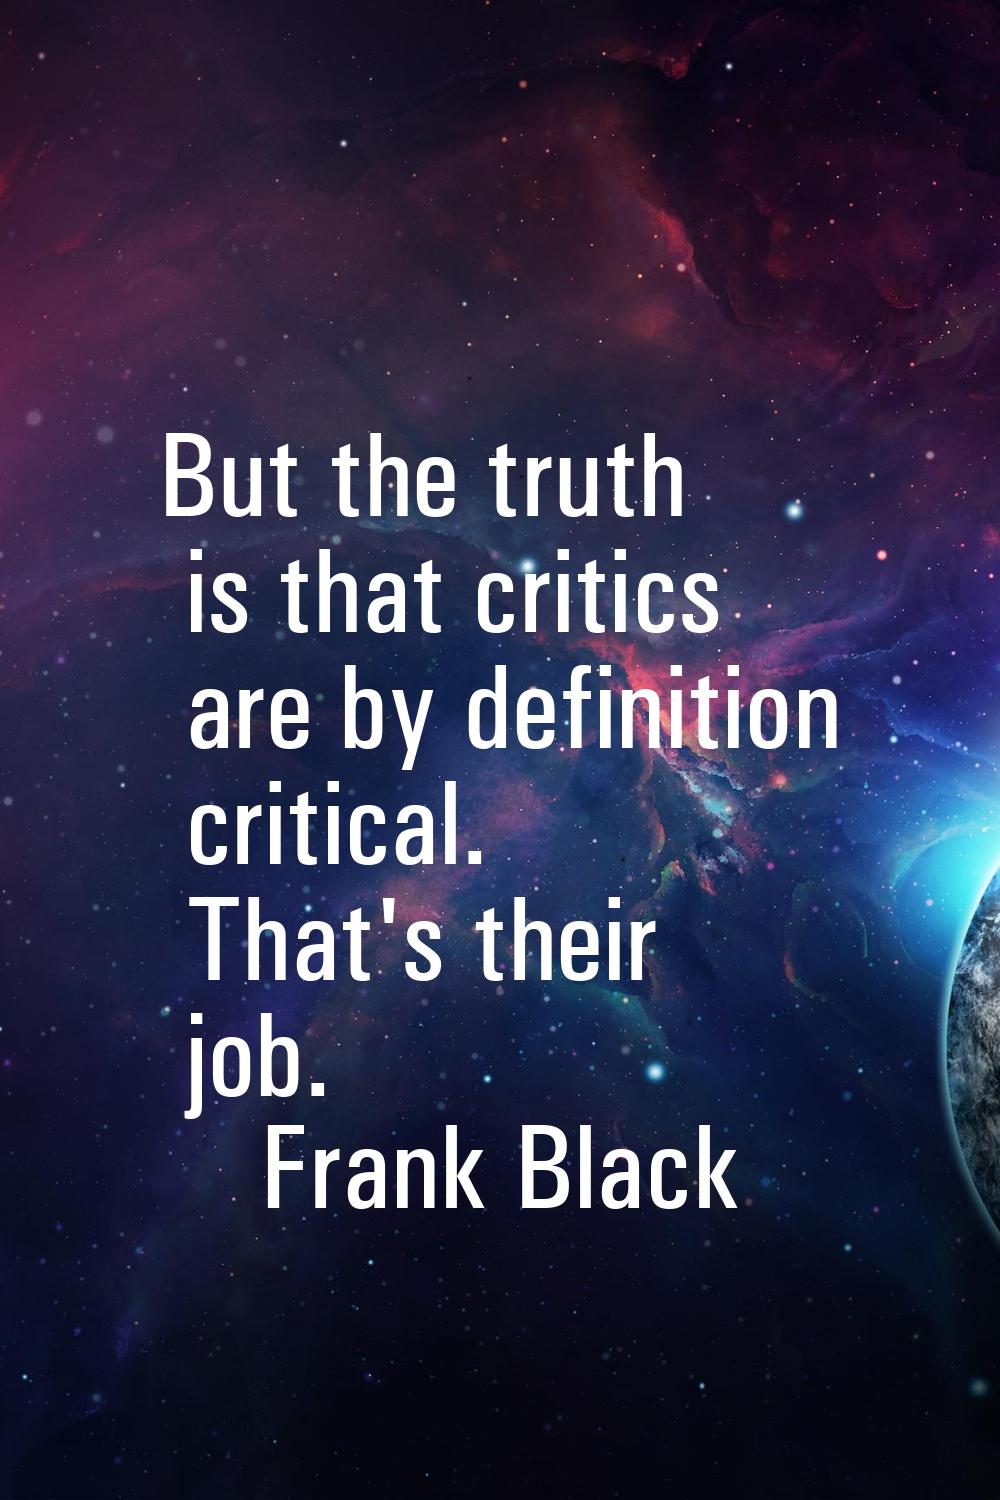 But the truth is that critics are by definition critical. That's their job.